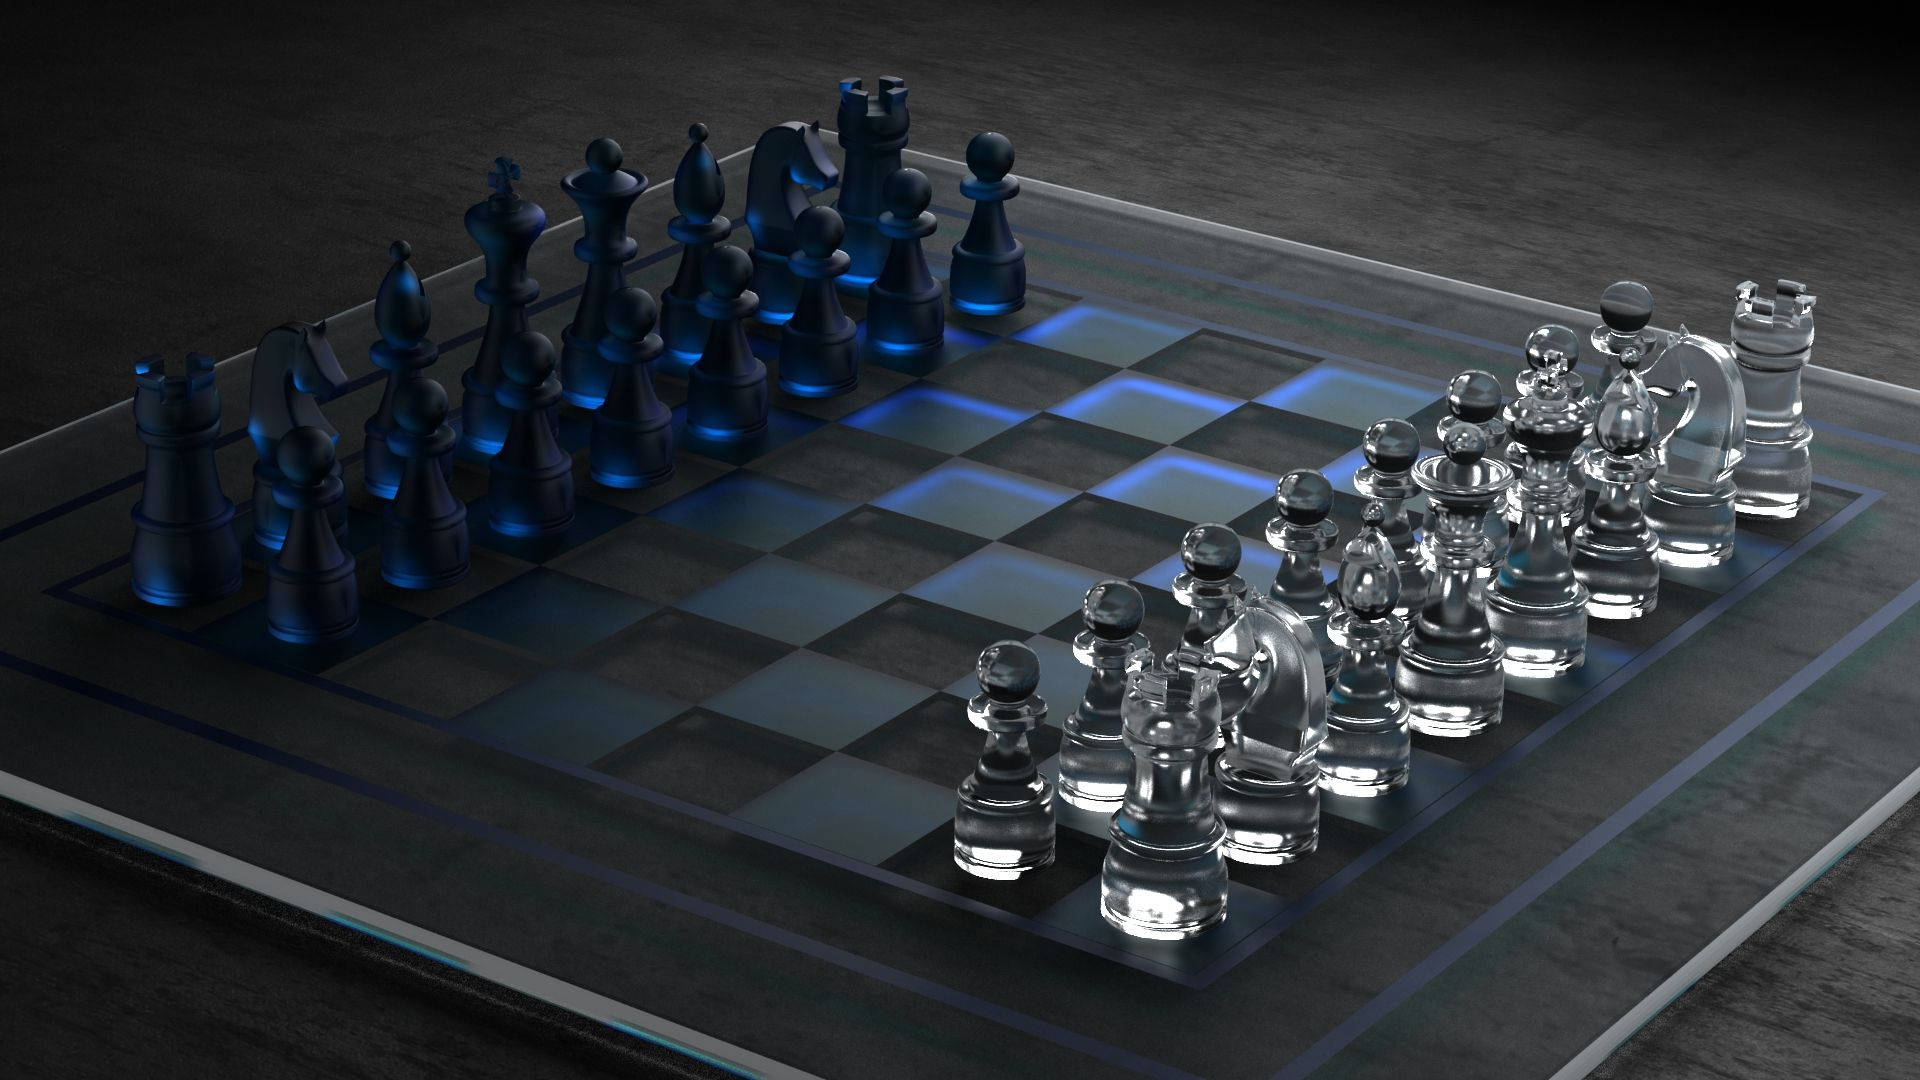 Exquisite 3d Chessboard On An Android Screen Wallpaper